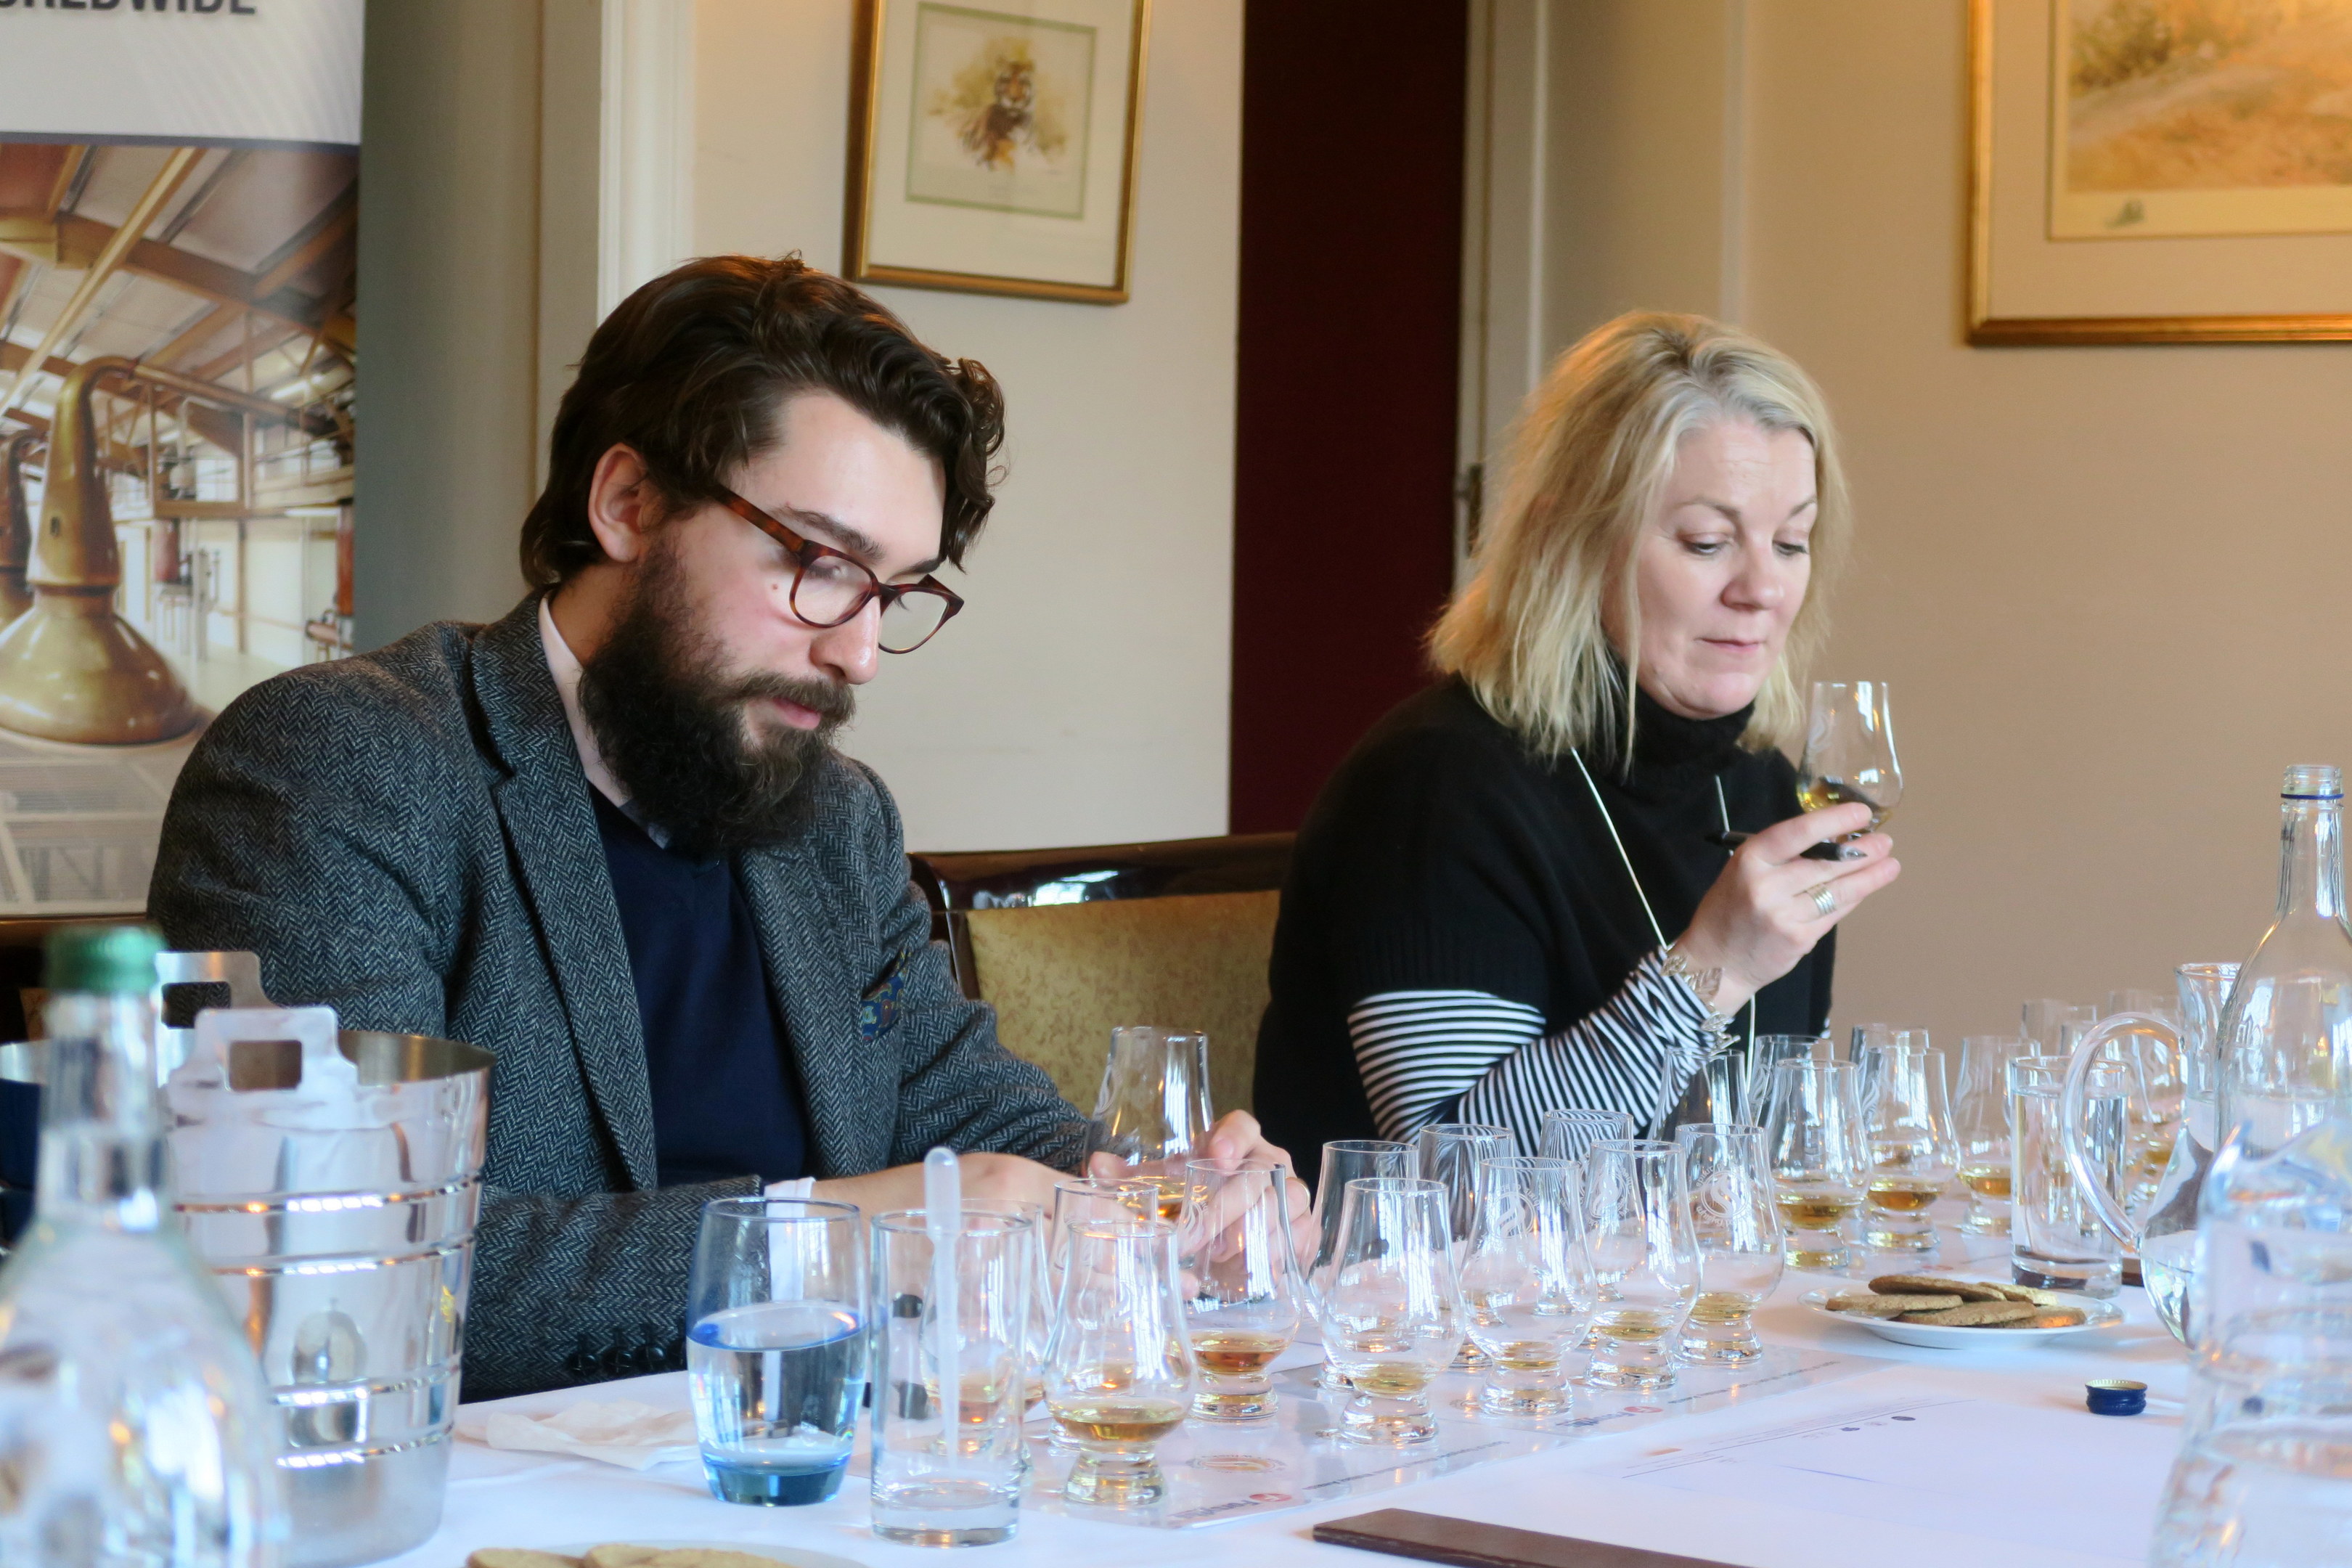 Director of Keepers of the Quaich, Annabel Miekle, and whisky writer Blair Bowman sample the whiskies in the blind tasting as part of the judging panel.